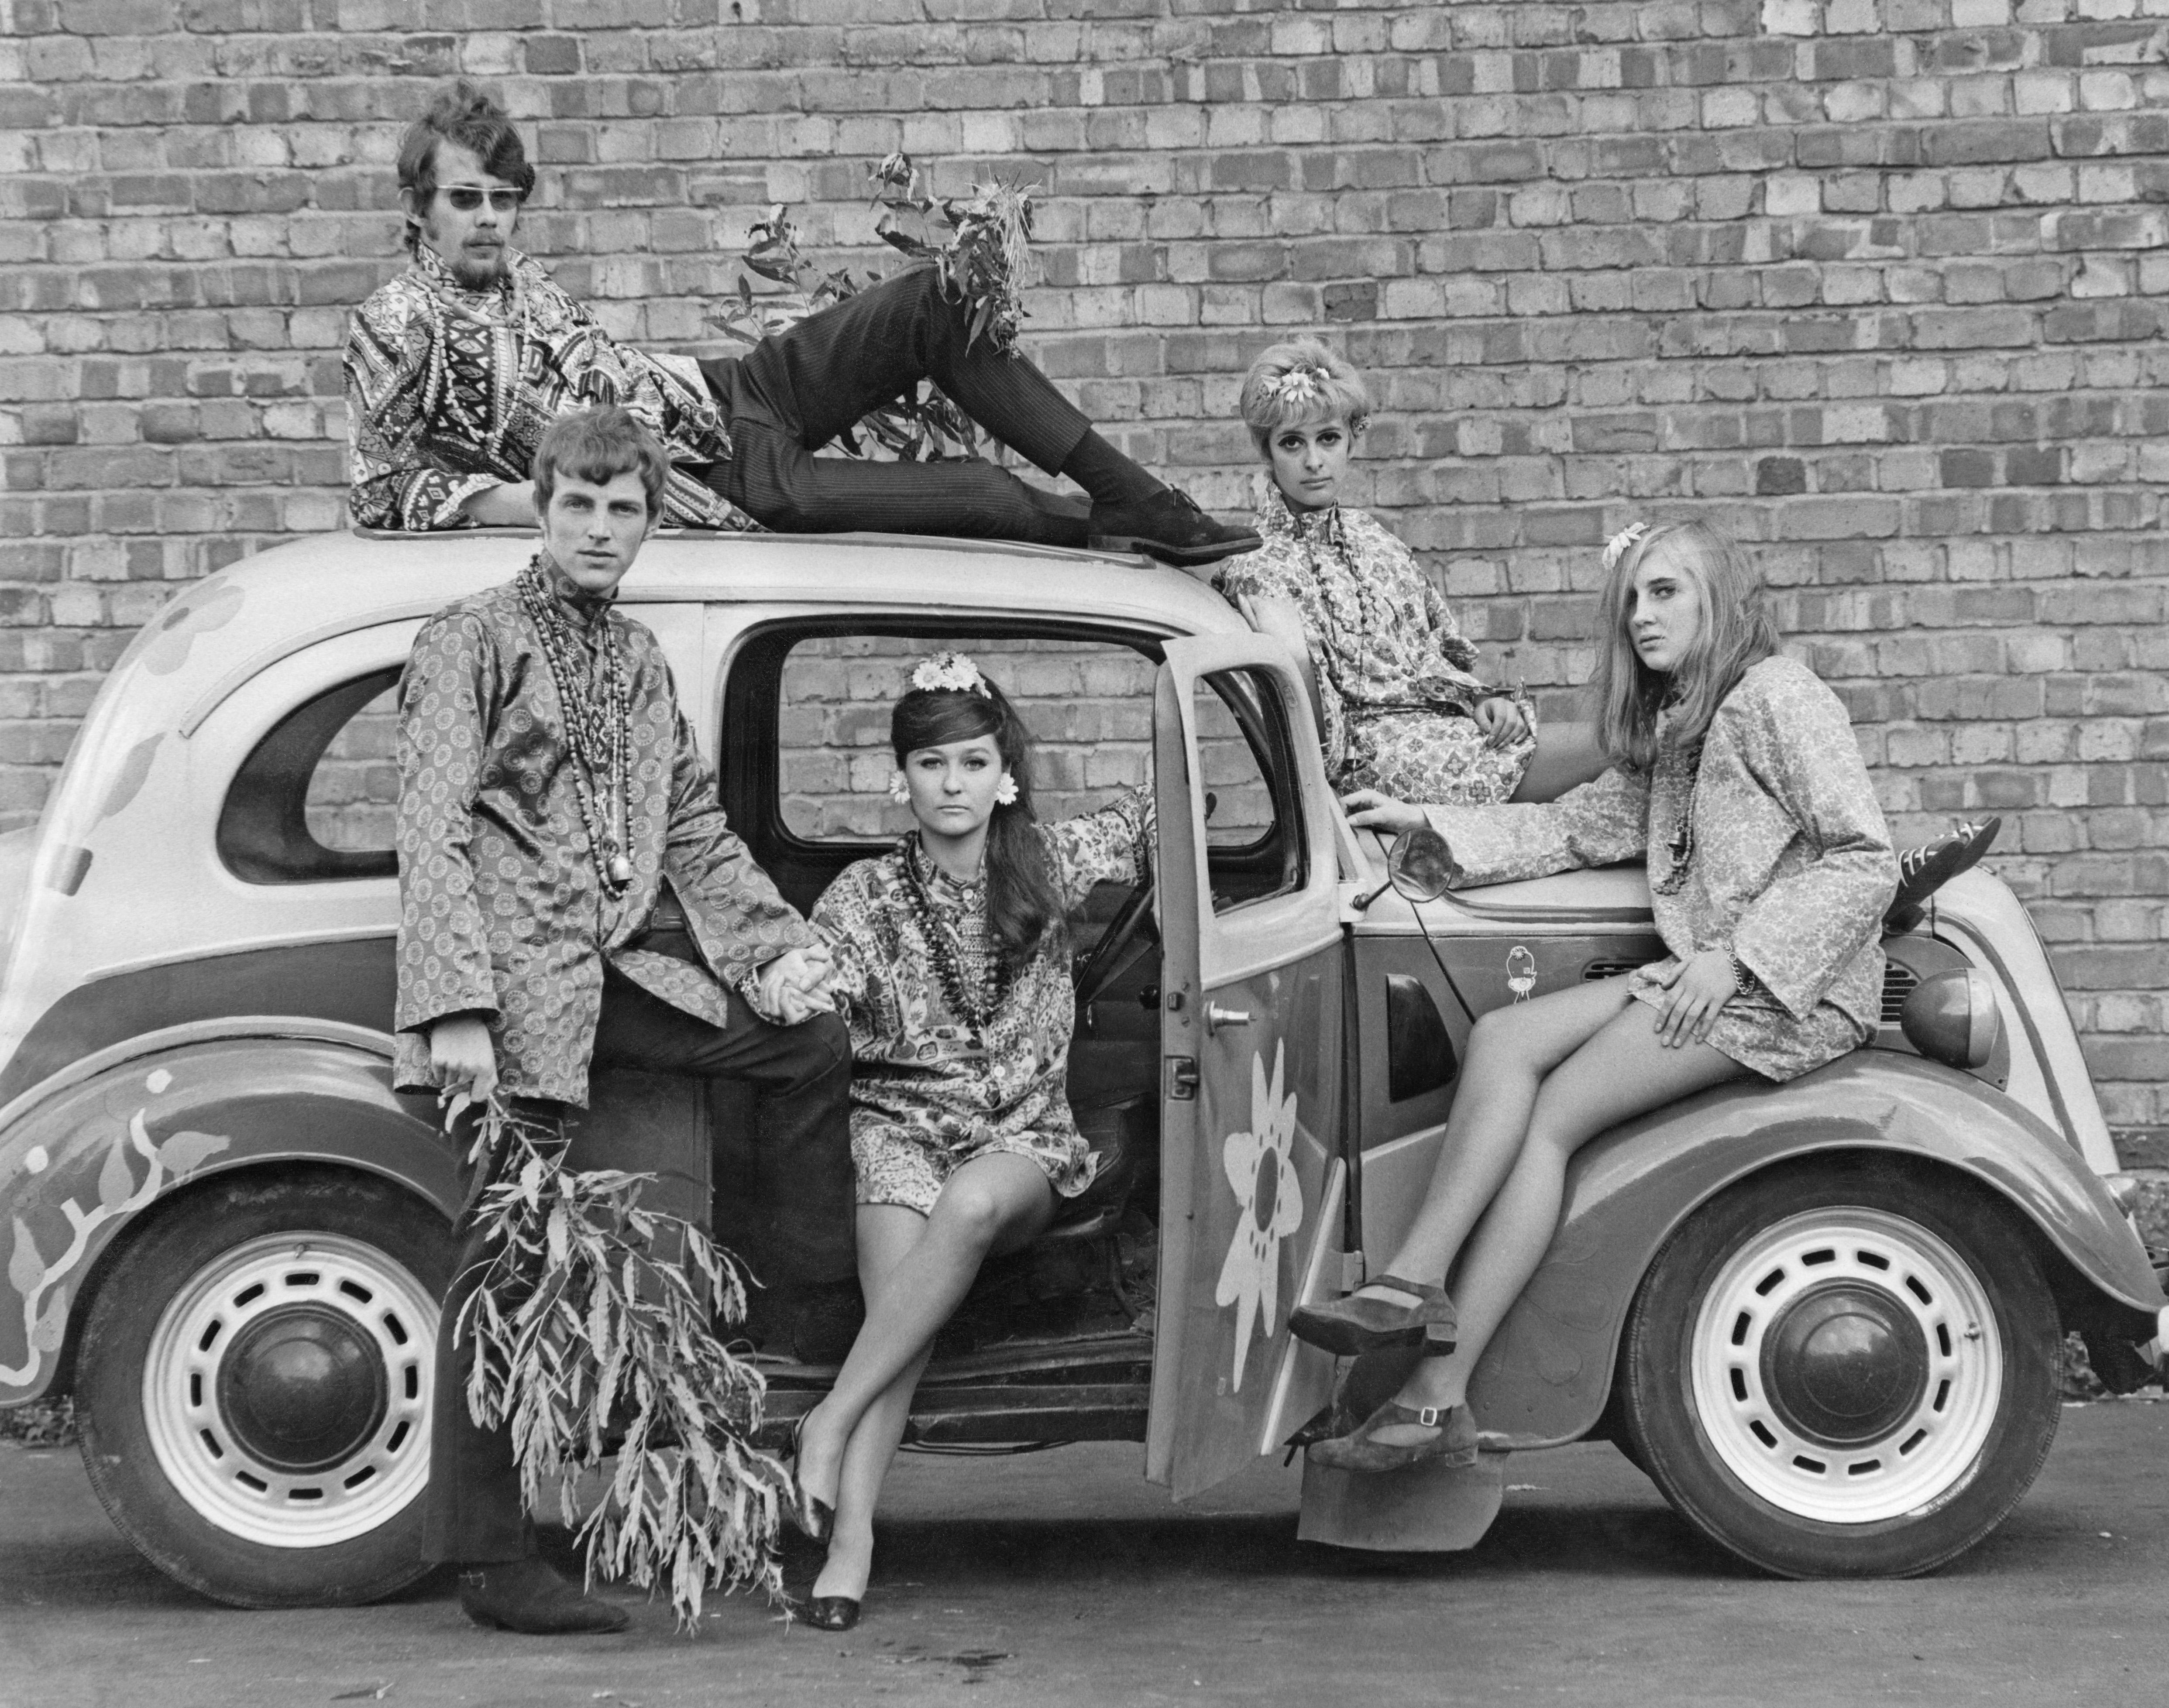 Brian Duff 'Hippiemobile', Limited Edition Photographic Print, 16x20